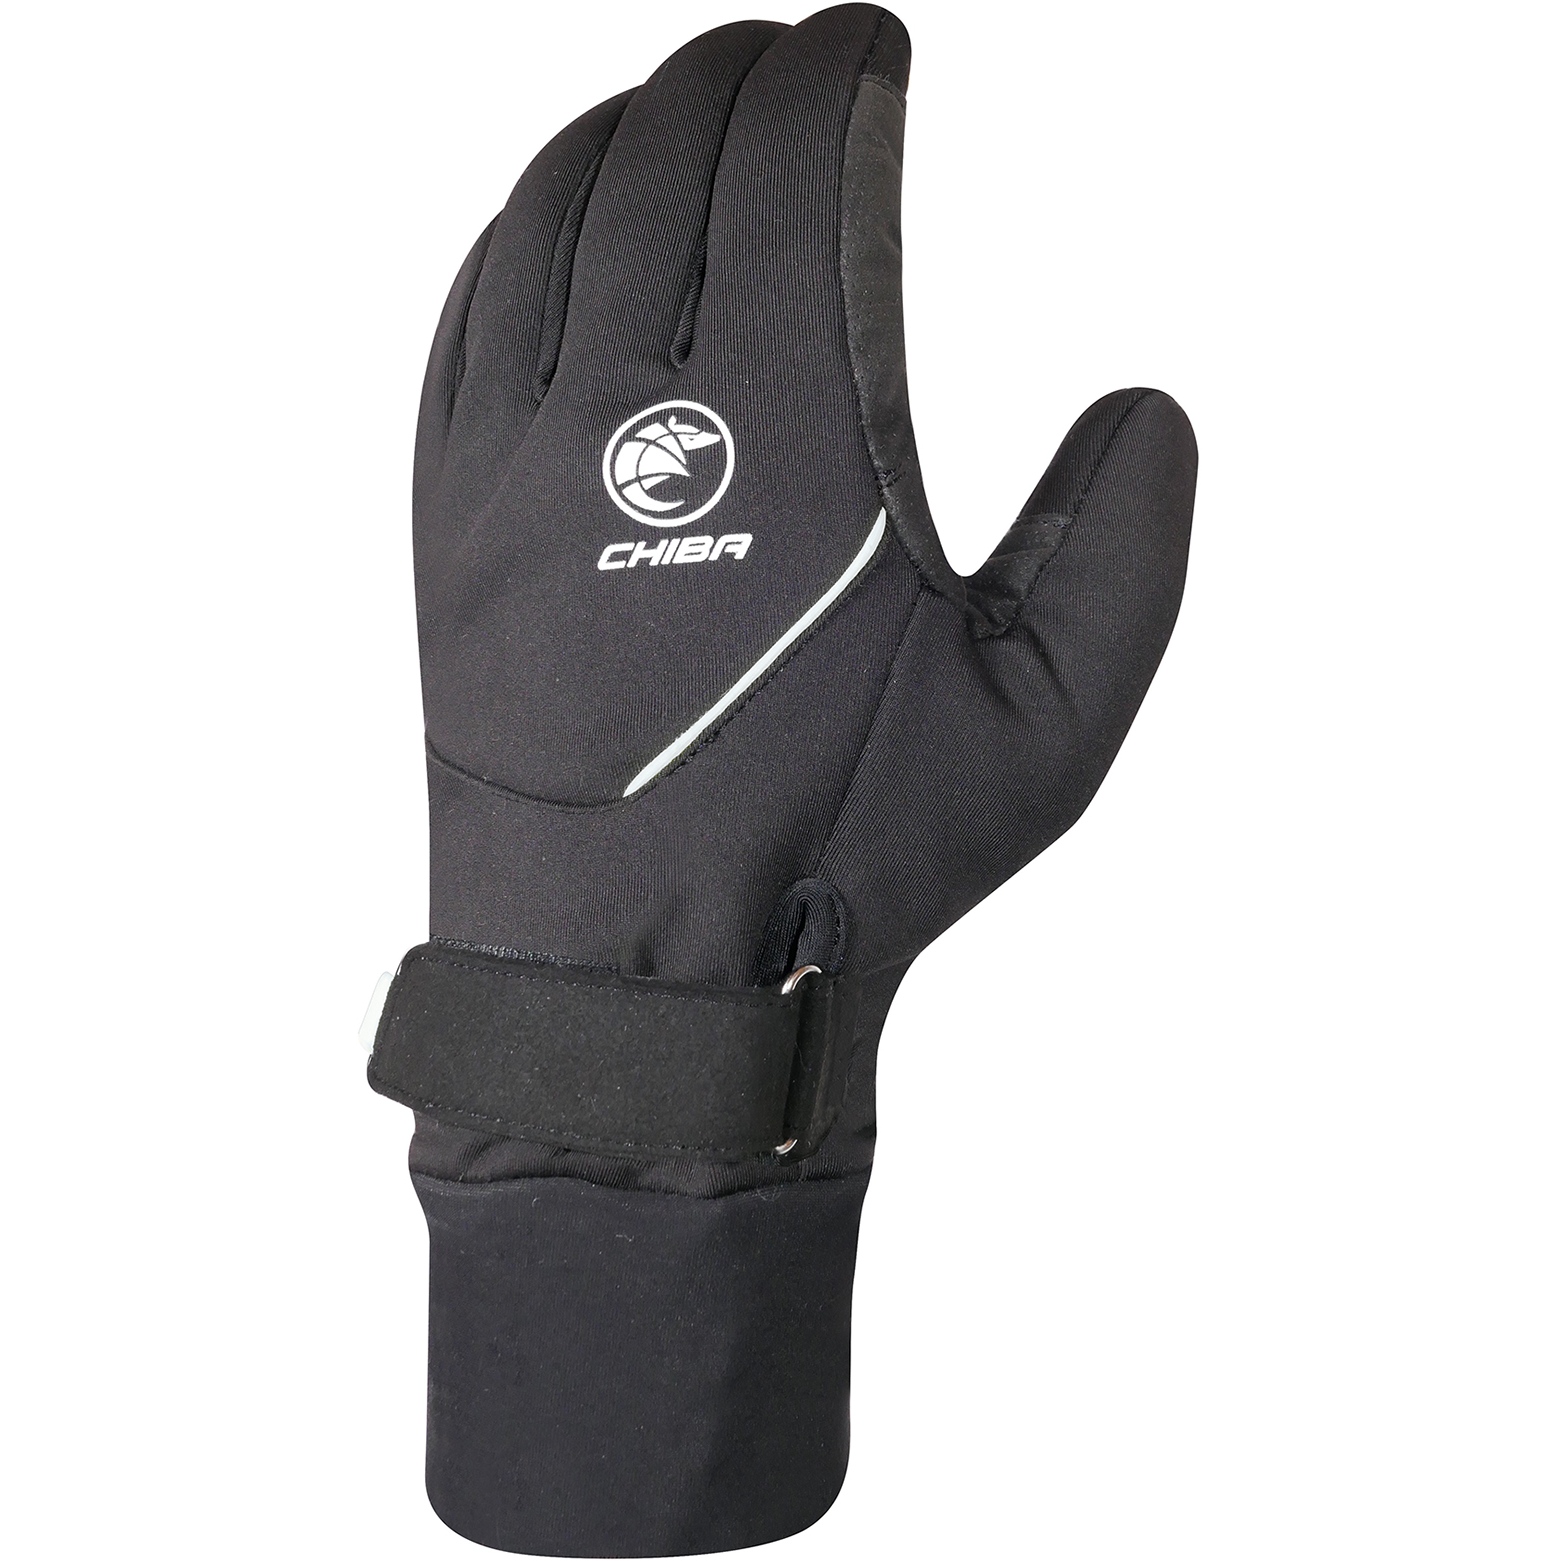 Picture of Chiba Rain Pro Warm Cycling Gloves - black/white